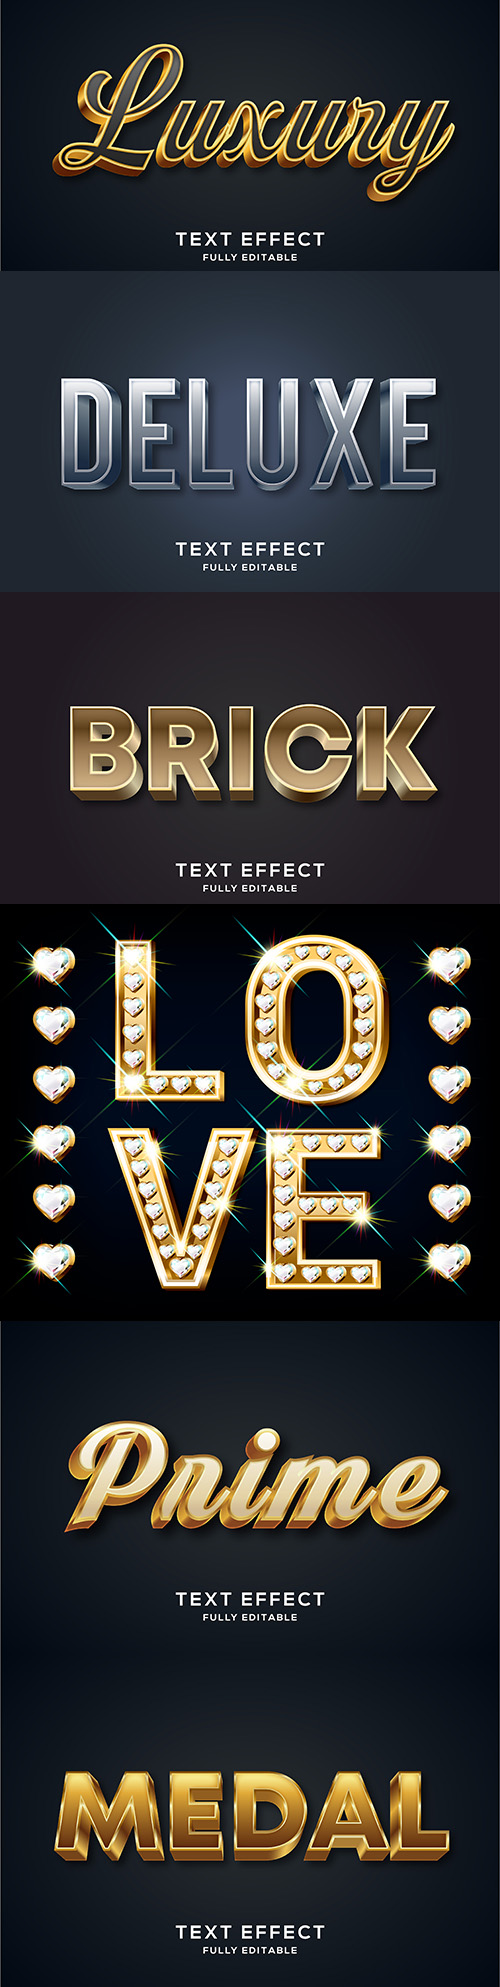 Editable font and 3d effect text design collection illustration 63